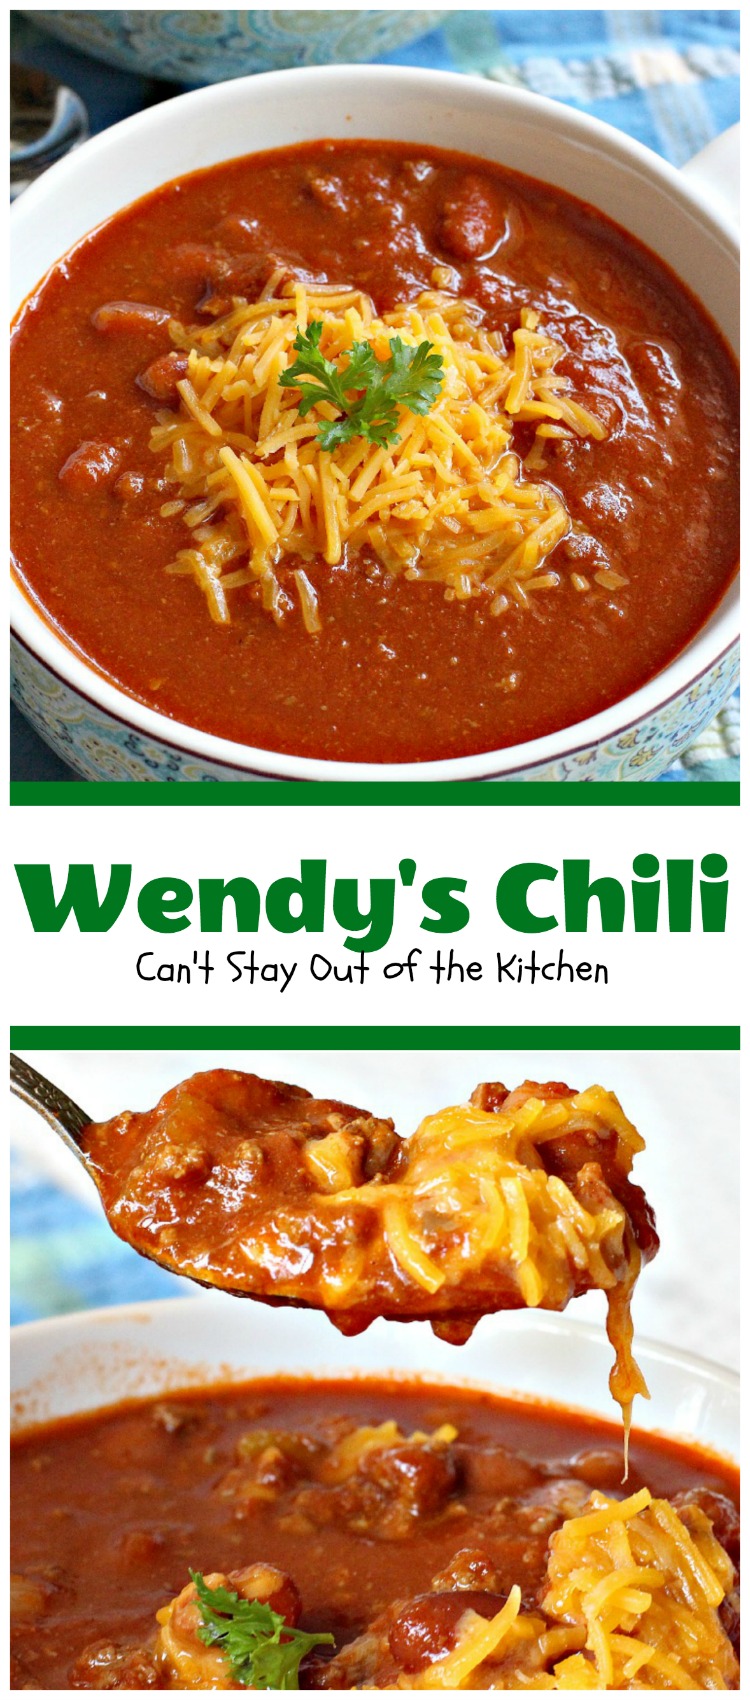 Wendy's Chili | Can't Stay Out of the Kitchen